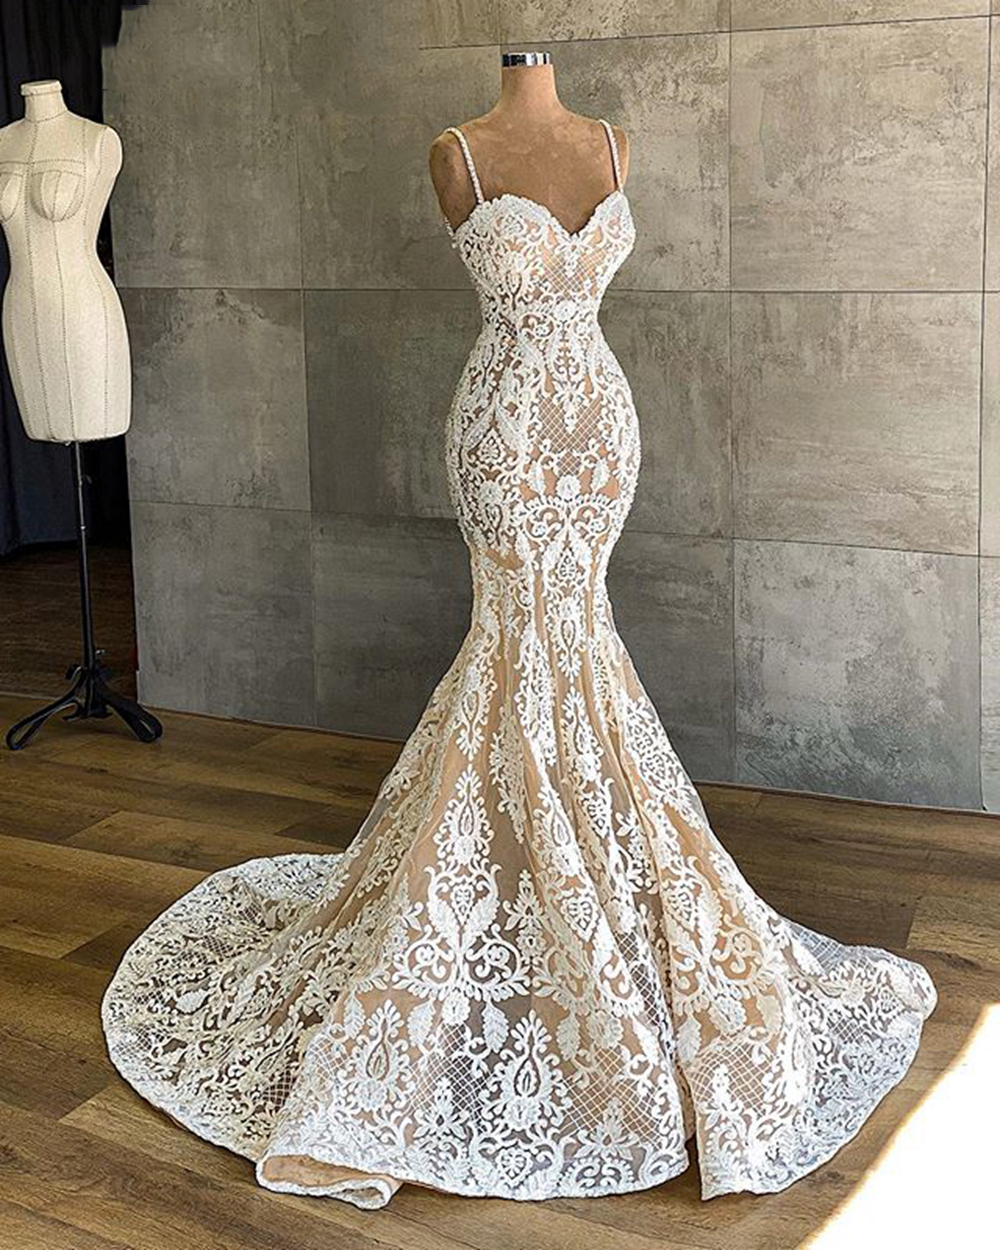 Modest Full Lace Mermaid Wedding Dresses 2023 Sweetheart With Spaghetti Straps Africa Women Bridal Gown Bride Dress